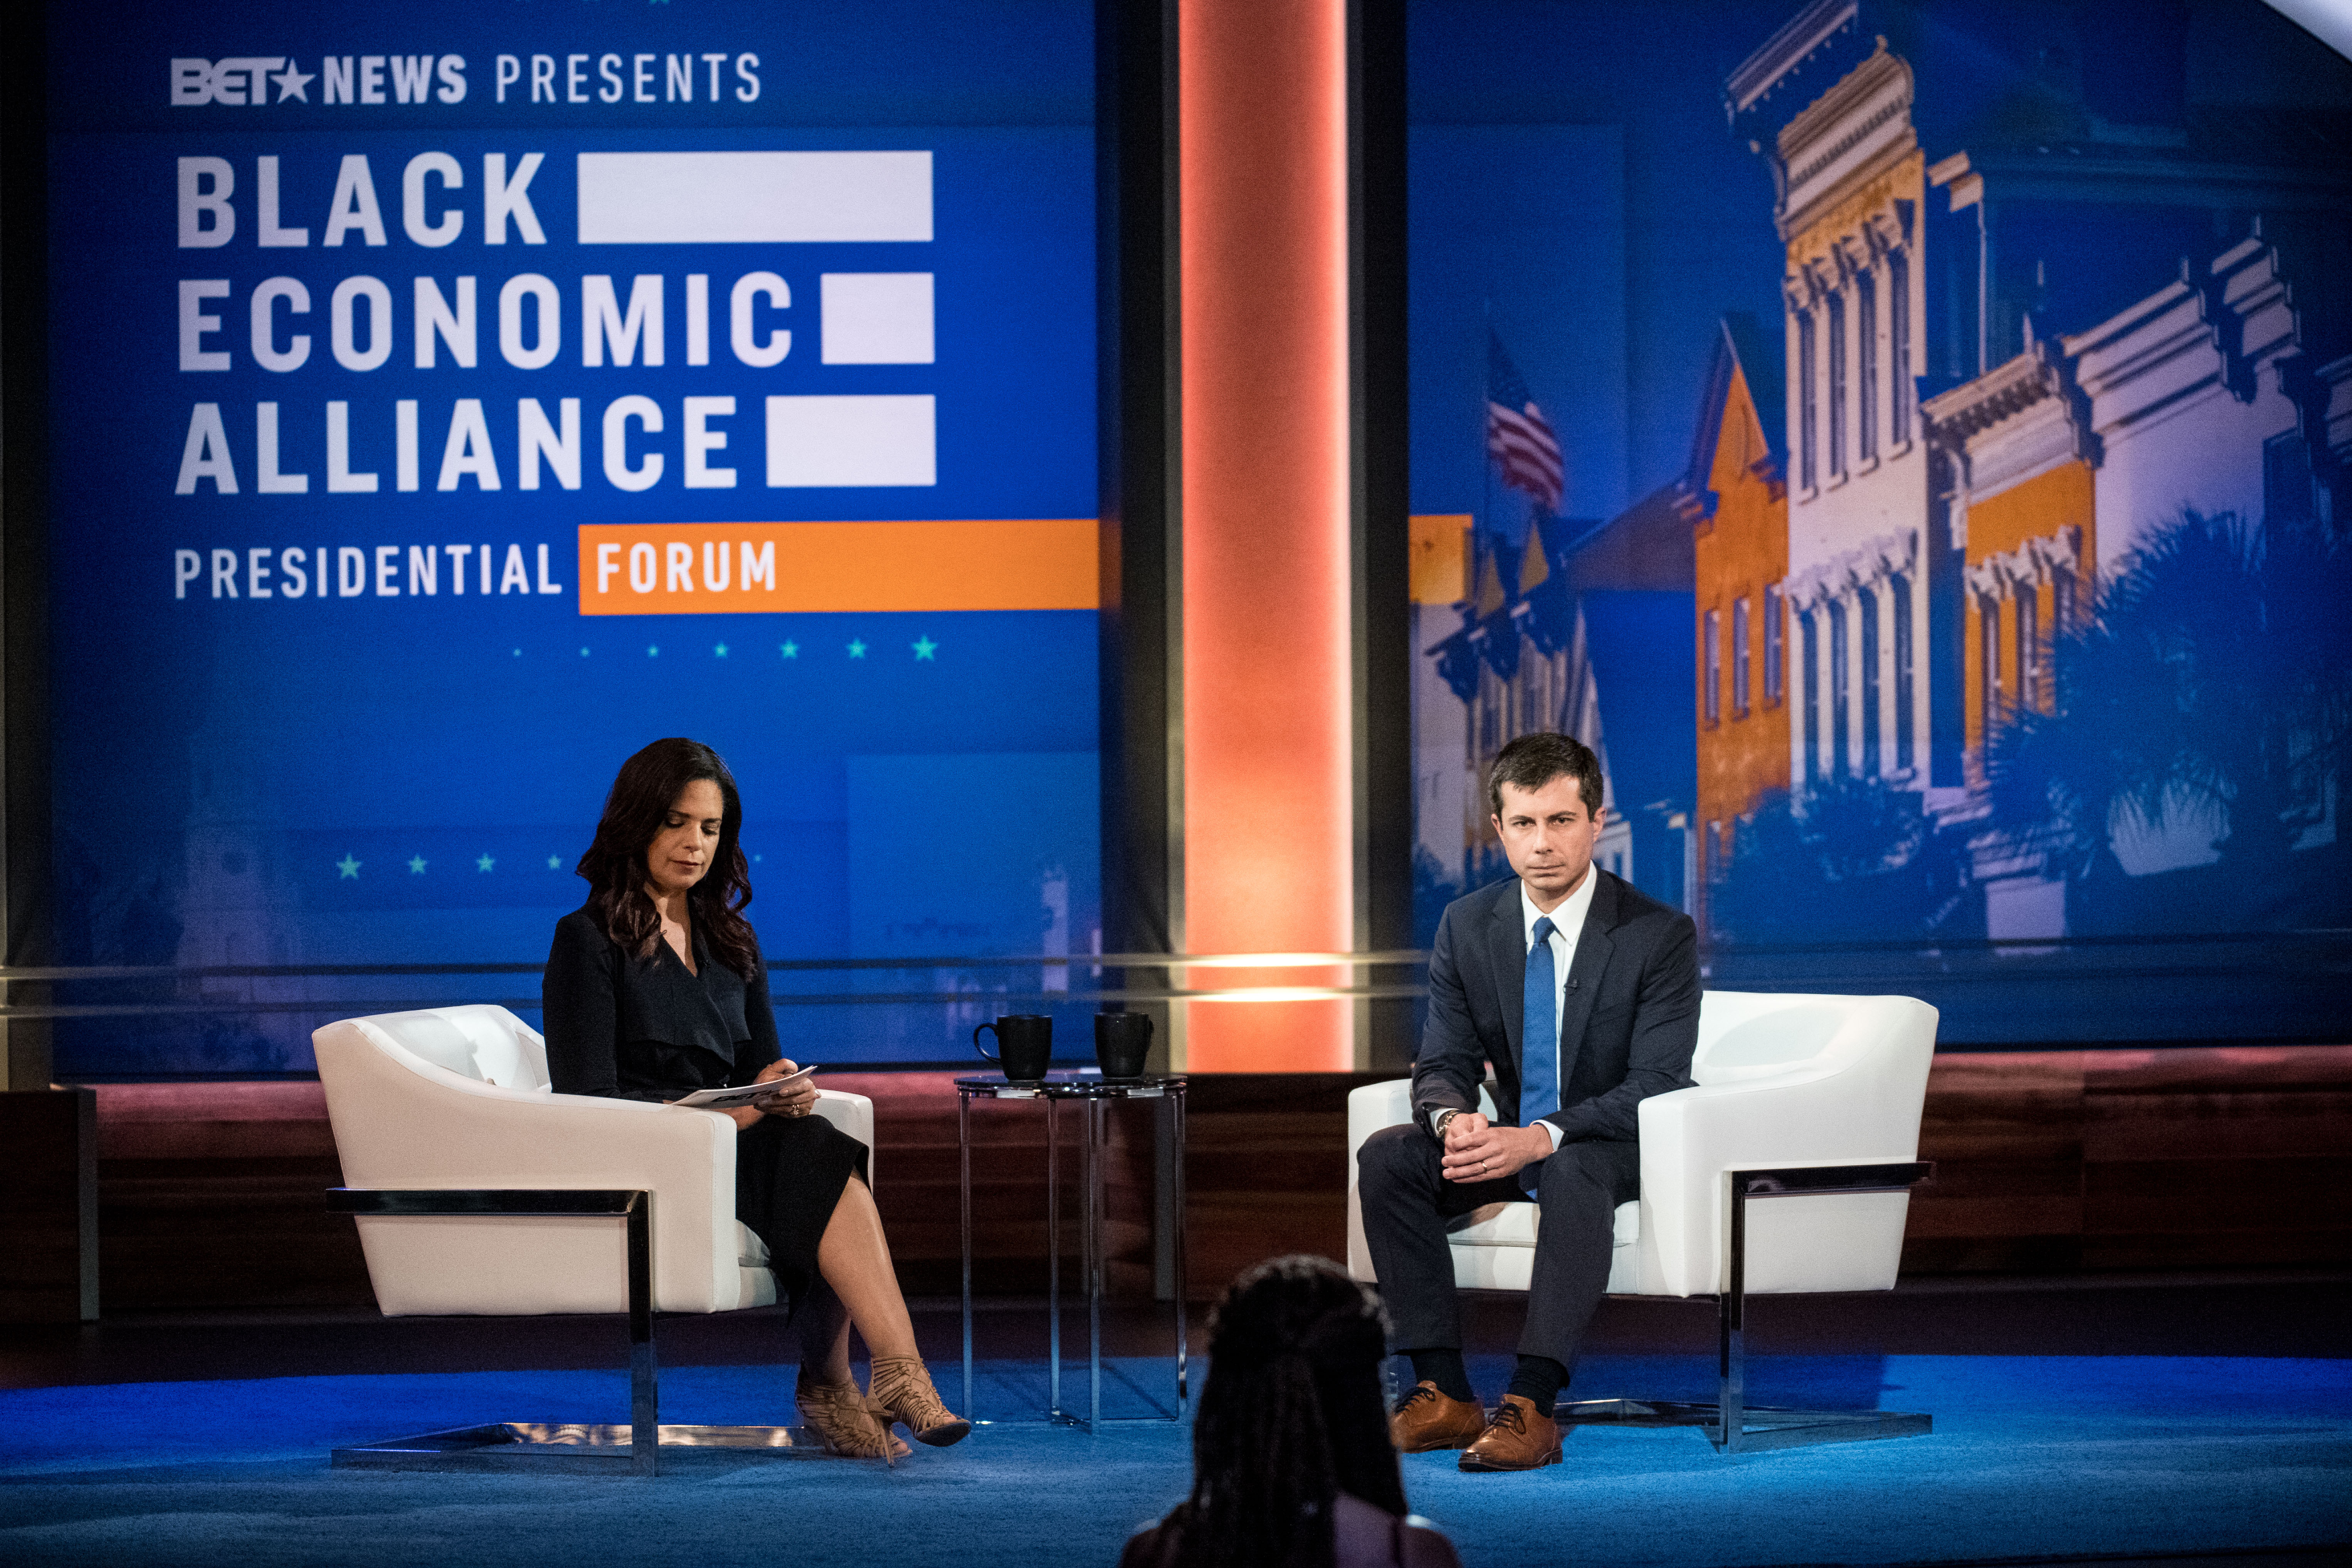 South Bend, Indiana Mayor Pete Buttigieg onstage at the Black Economic Alliance Presidential Forum in South Carolina on June 15, 2019.